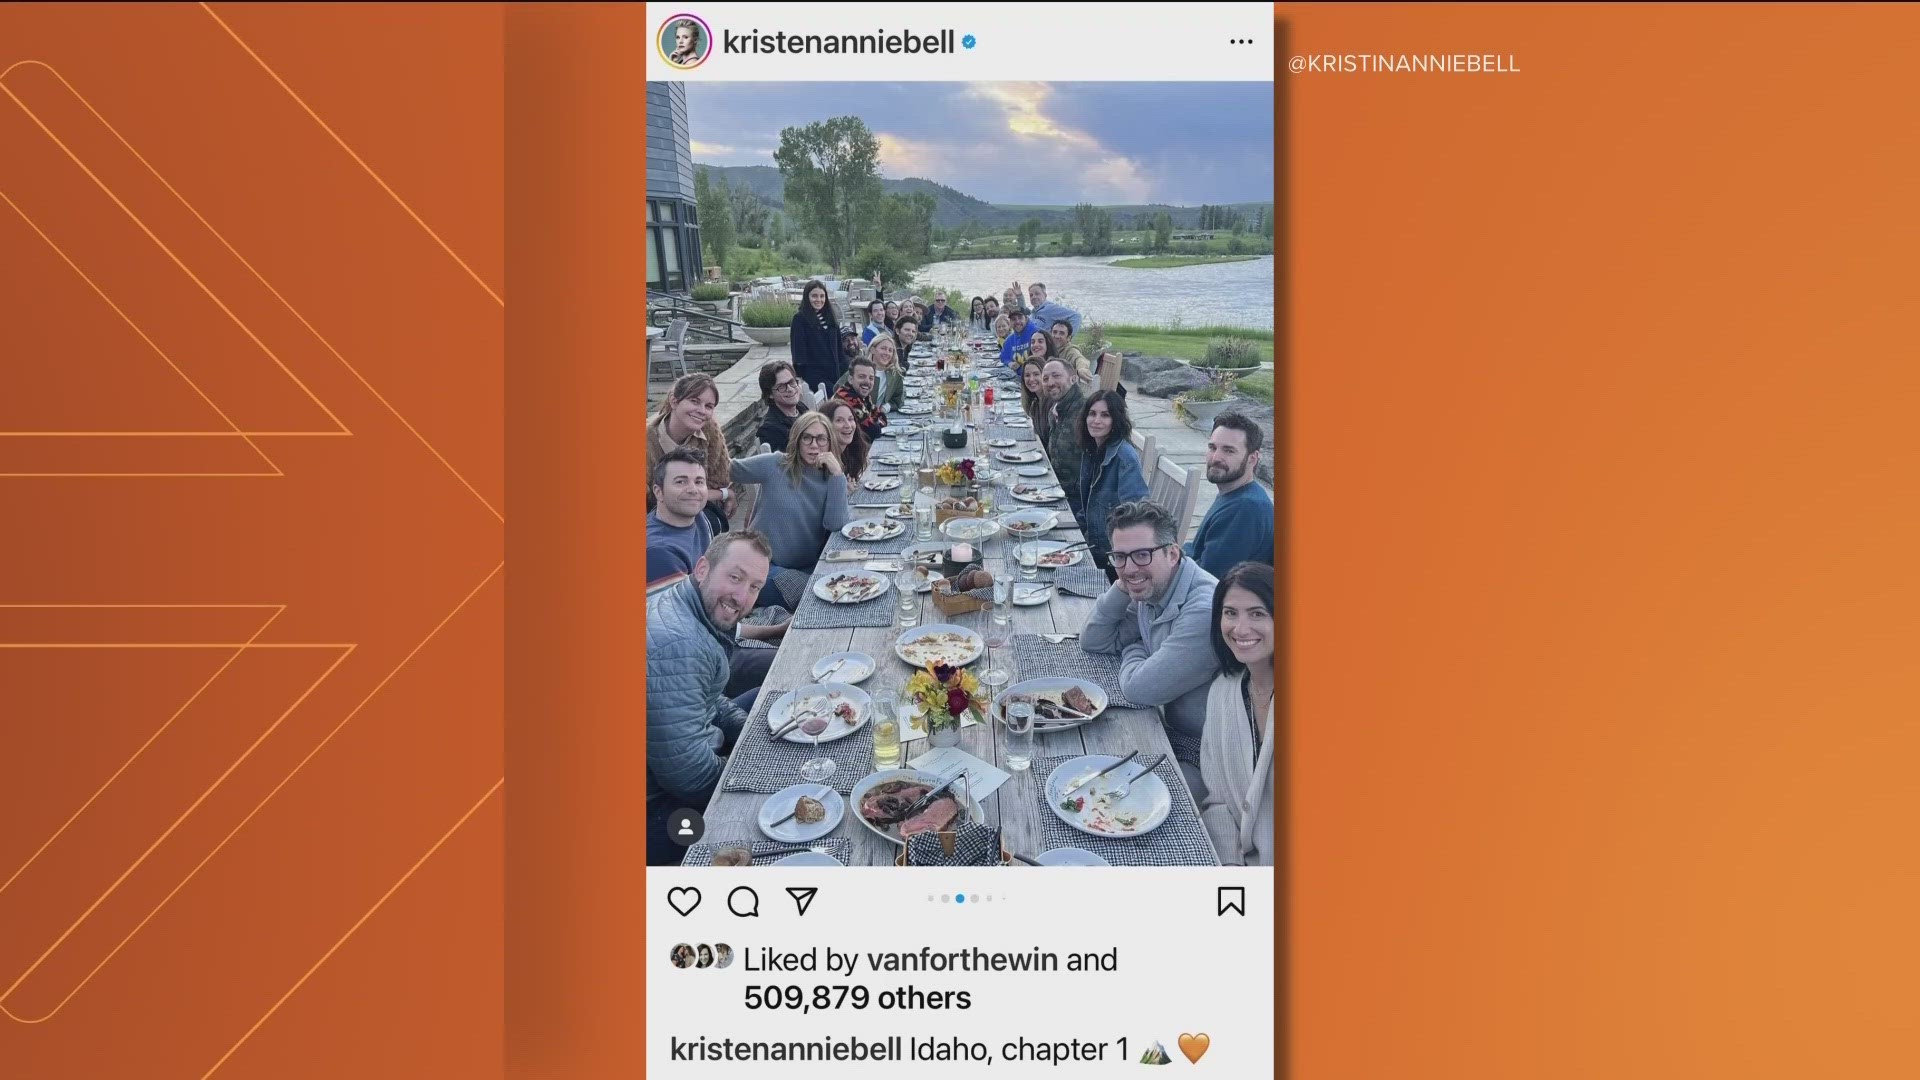 East Idaho was home to dozens of A-listers over the weekend attending a dinner party. The celebrity guest list will leave you starry-eyed as you go down the table.